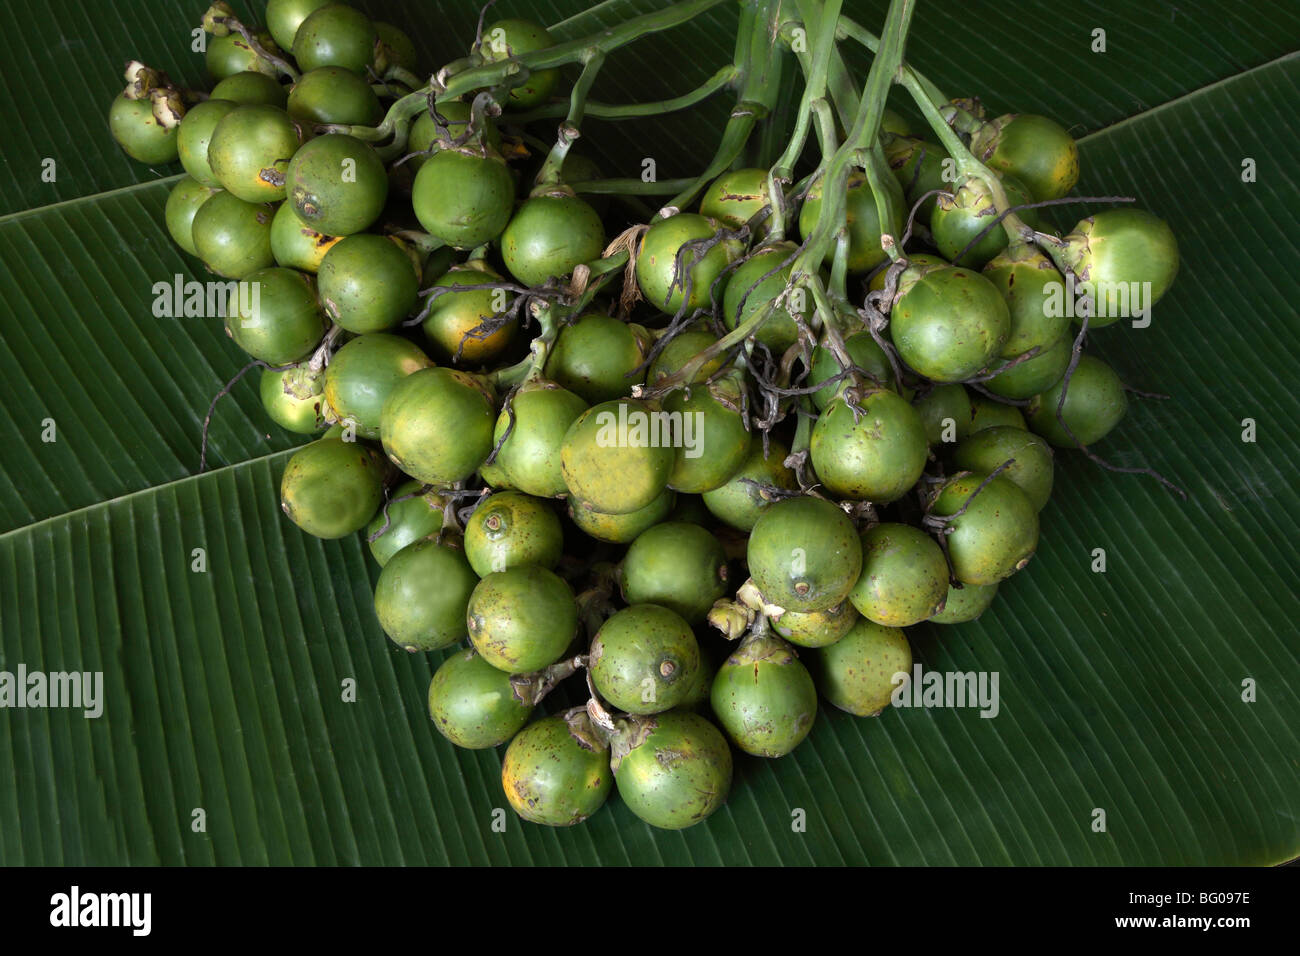 Betel nut, reported to be anti-parasitic, laxative, it also increases heart rate and blood pressure, India Stock Photo